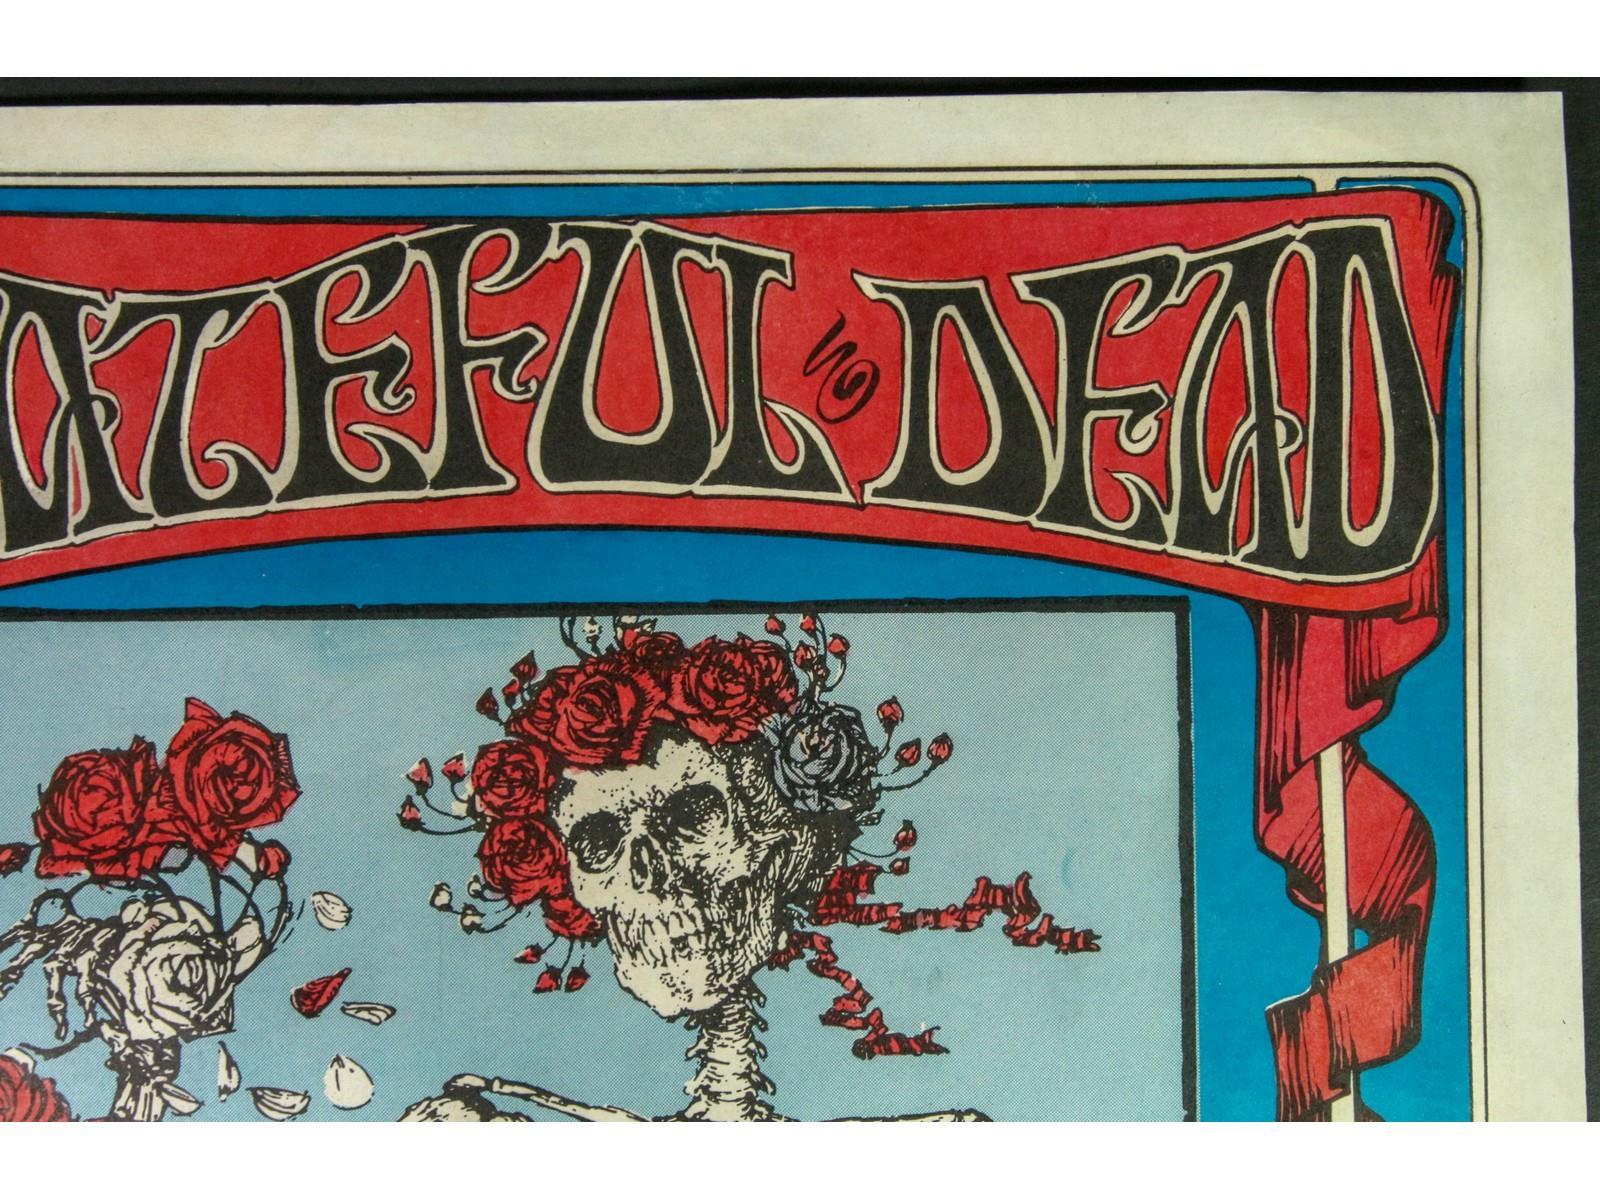 Grateful Dead FD26 First Printing Signed Poster